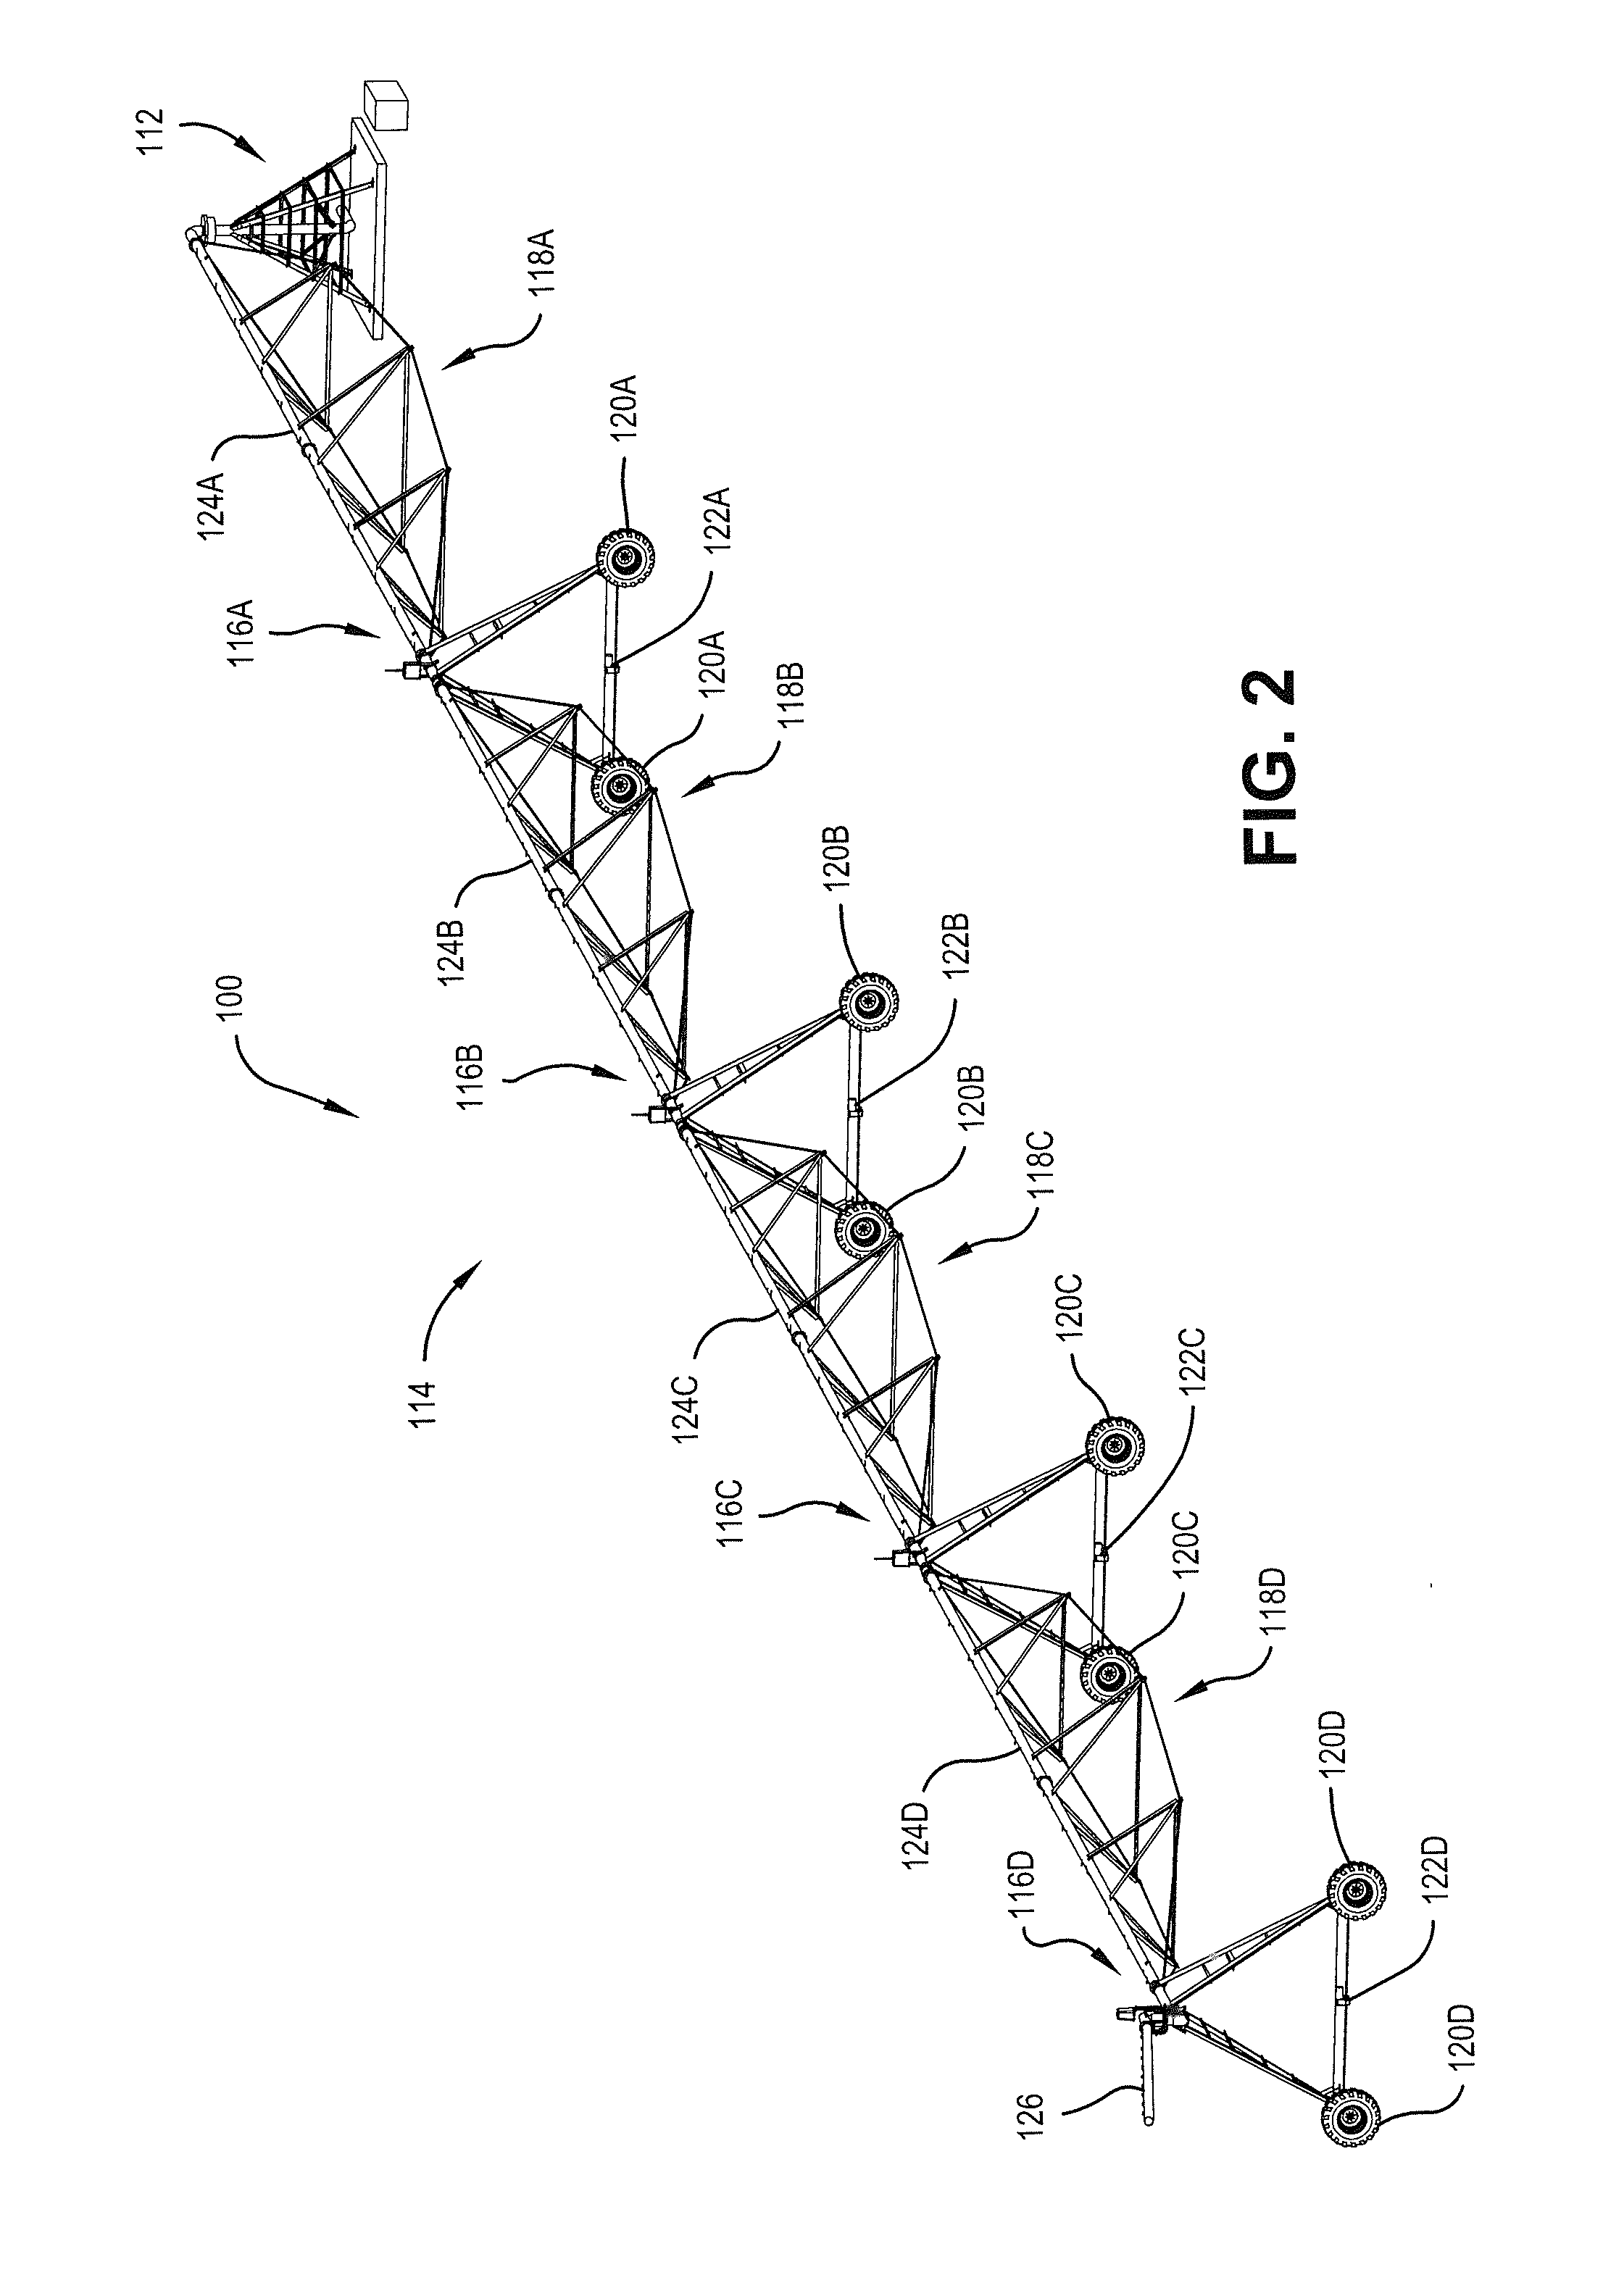 Low-power start-up and direction control circuitry for an irrigation system